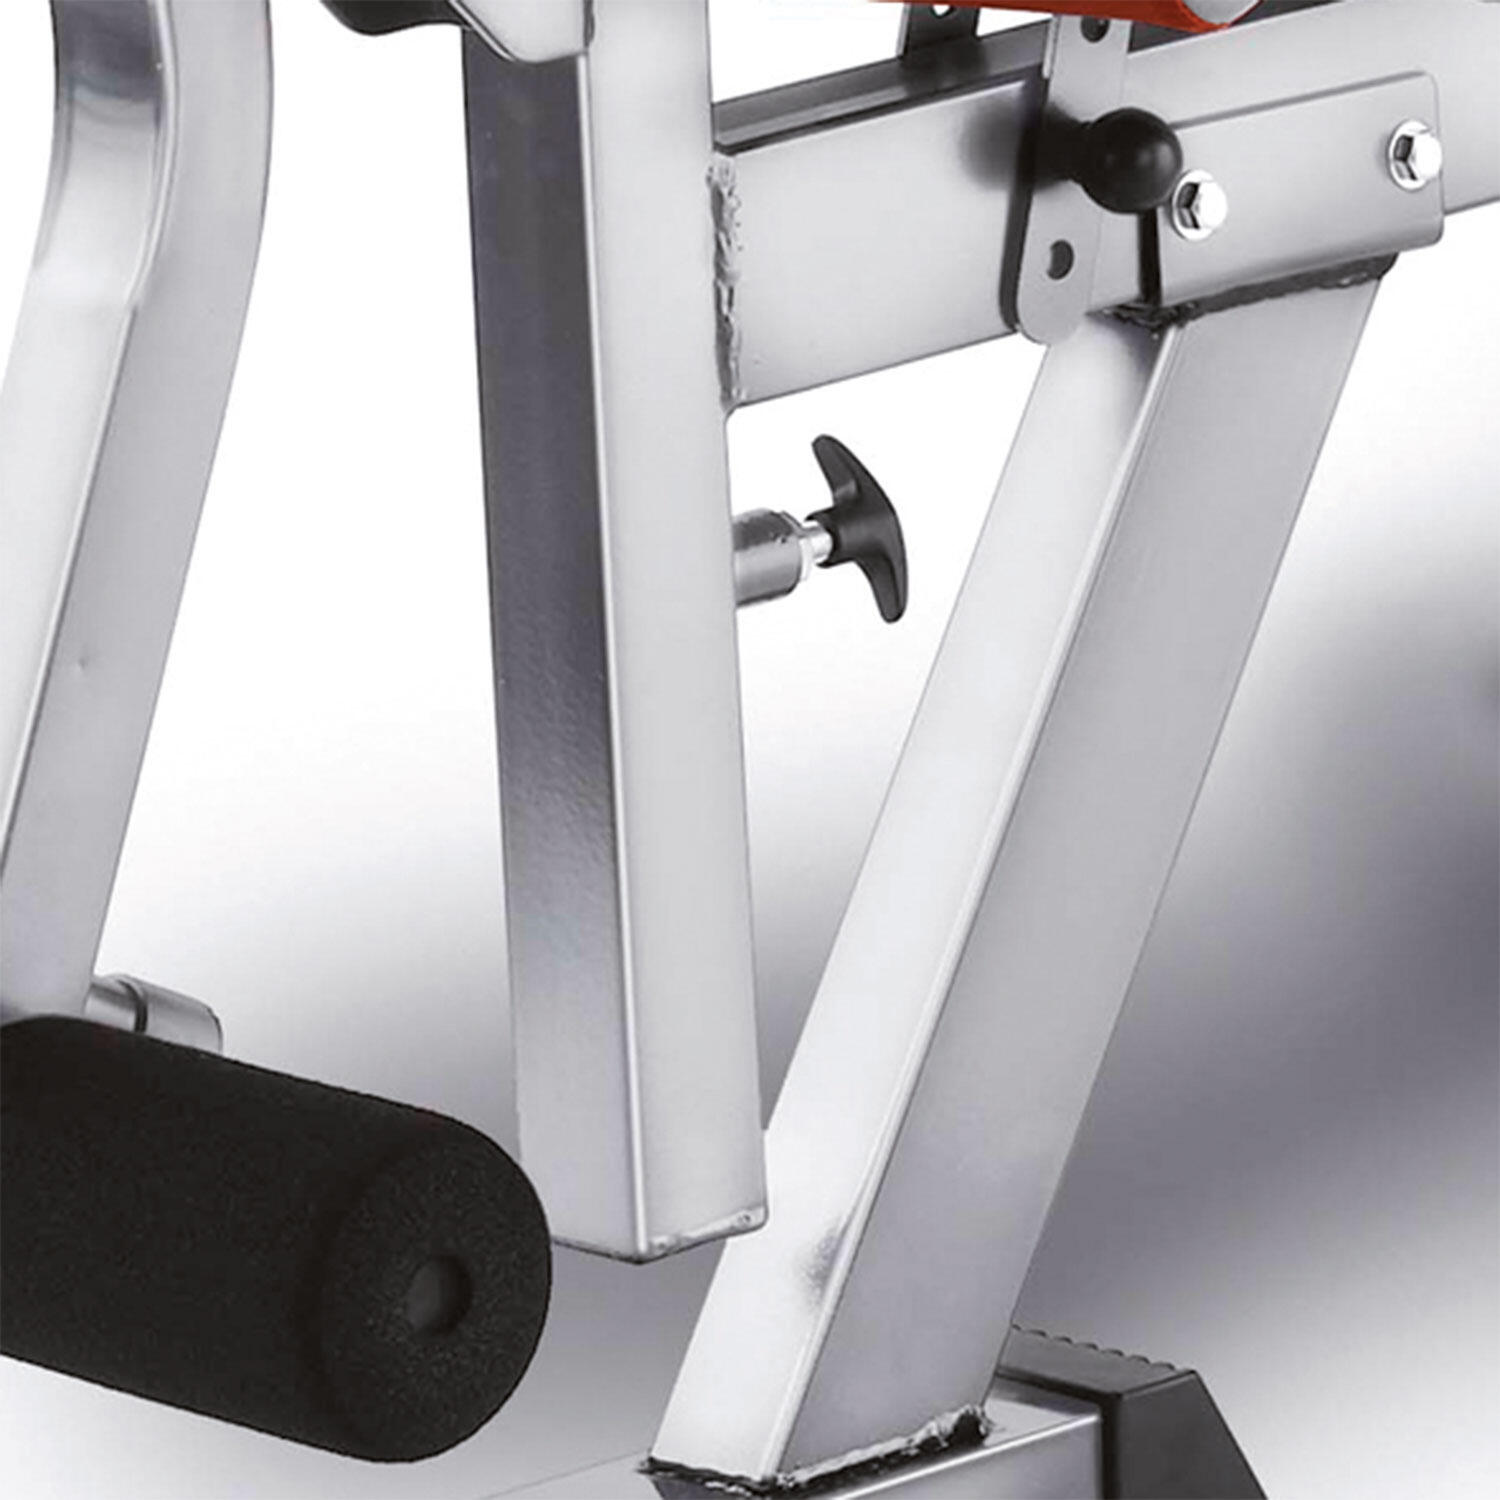 BH FITNESS OPTIMA PRESS G330 WEIGHT BENCH WITH REAR SQUAT RACK 4/7